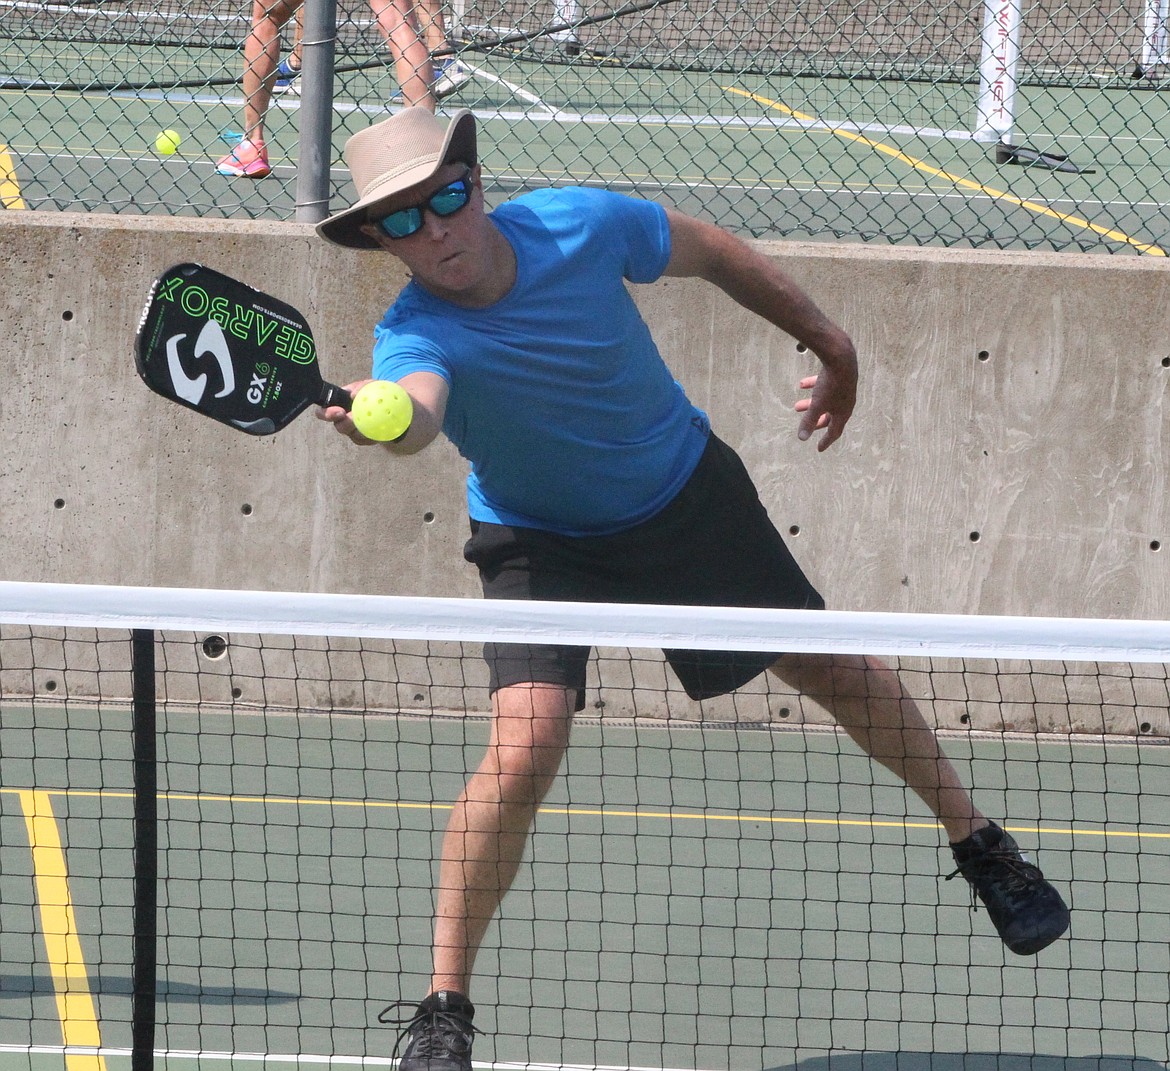 MARK NELKE/Press
Jeff Schmitt, of Priest Lake and formerly of Coeur d'Alene, reaches for a shot in the gold medal match in the mixed doubles 4.0 60-plus division at the Coeur d'Alene Classic pickleball tournament Saturday at Cherry Hill Park. The four-day tournament, which attracted 314 entrants, began Thursday with women's doubles, continued Friday and Saturday with mixed doubles brackets, and concludes today with men's doubles. Play today begins at 8 a.m., and figures to run through mid- to late-afternoon.